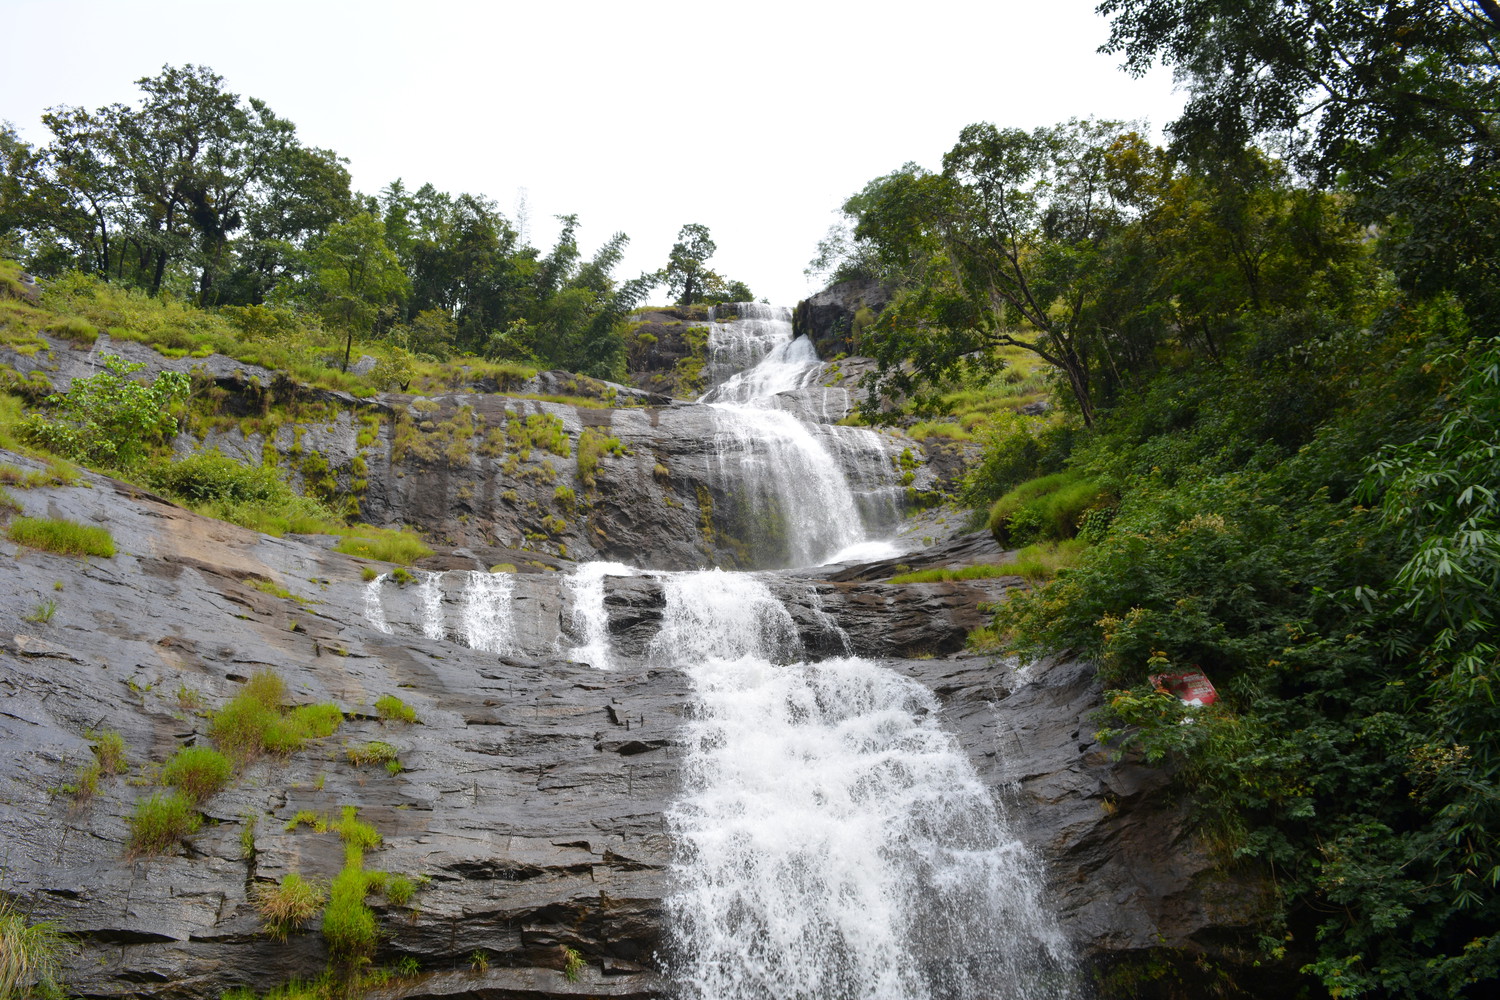 A seven-tiered waterfall